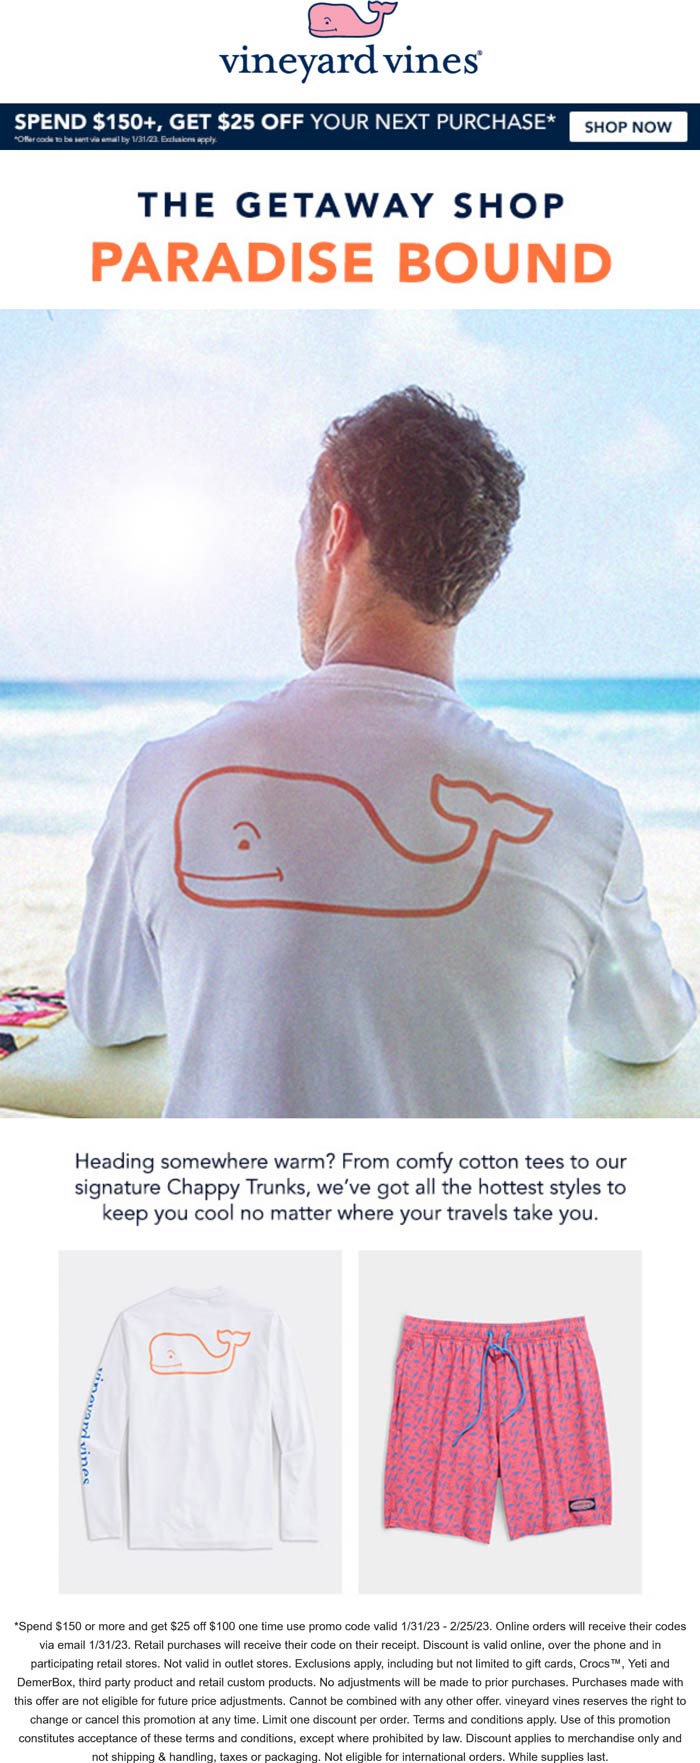 Vineyard Vines stores Coupon  $25 off $150 on followup purchase at Vineyard Vines #vineyardvines 